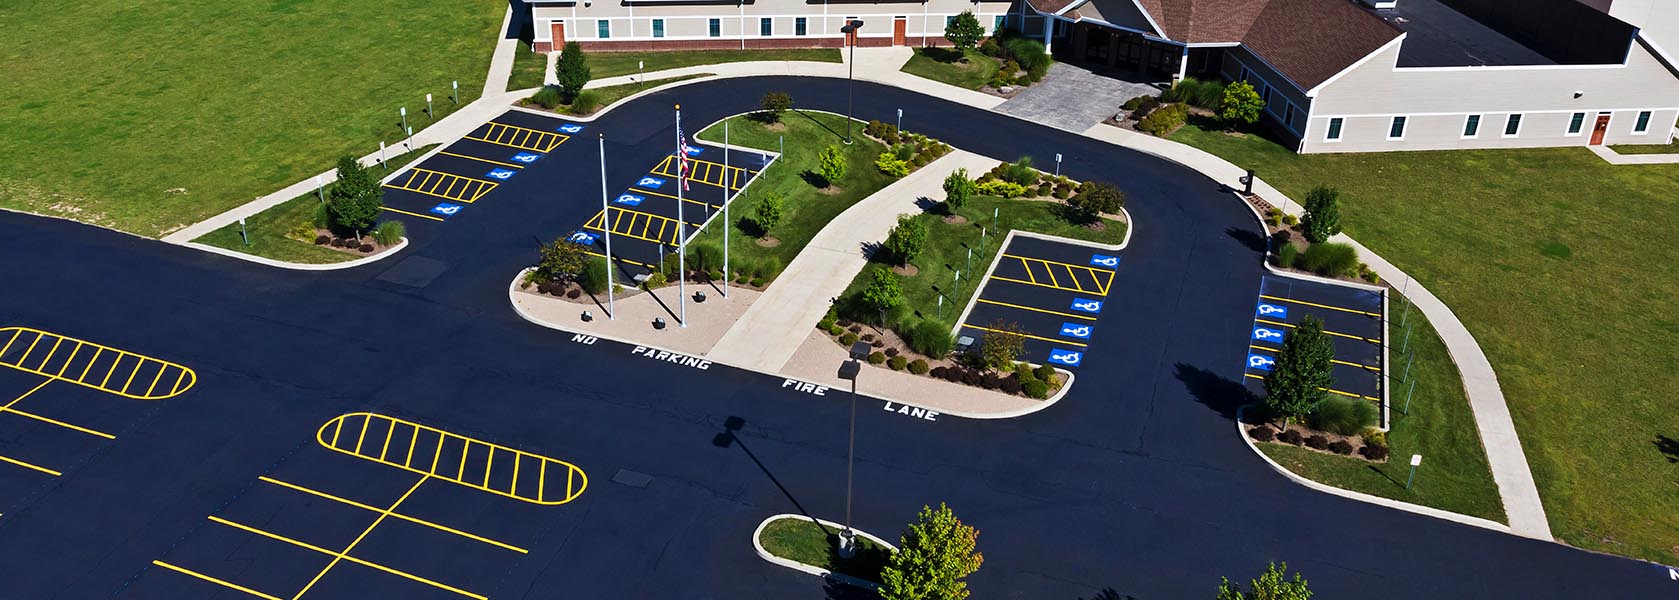 Parking Lot Paving and Sealing in Rochester, NY | North Coast Property Maintenance